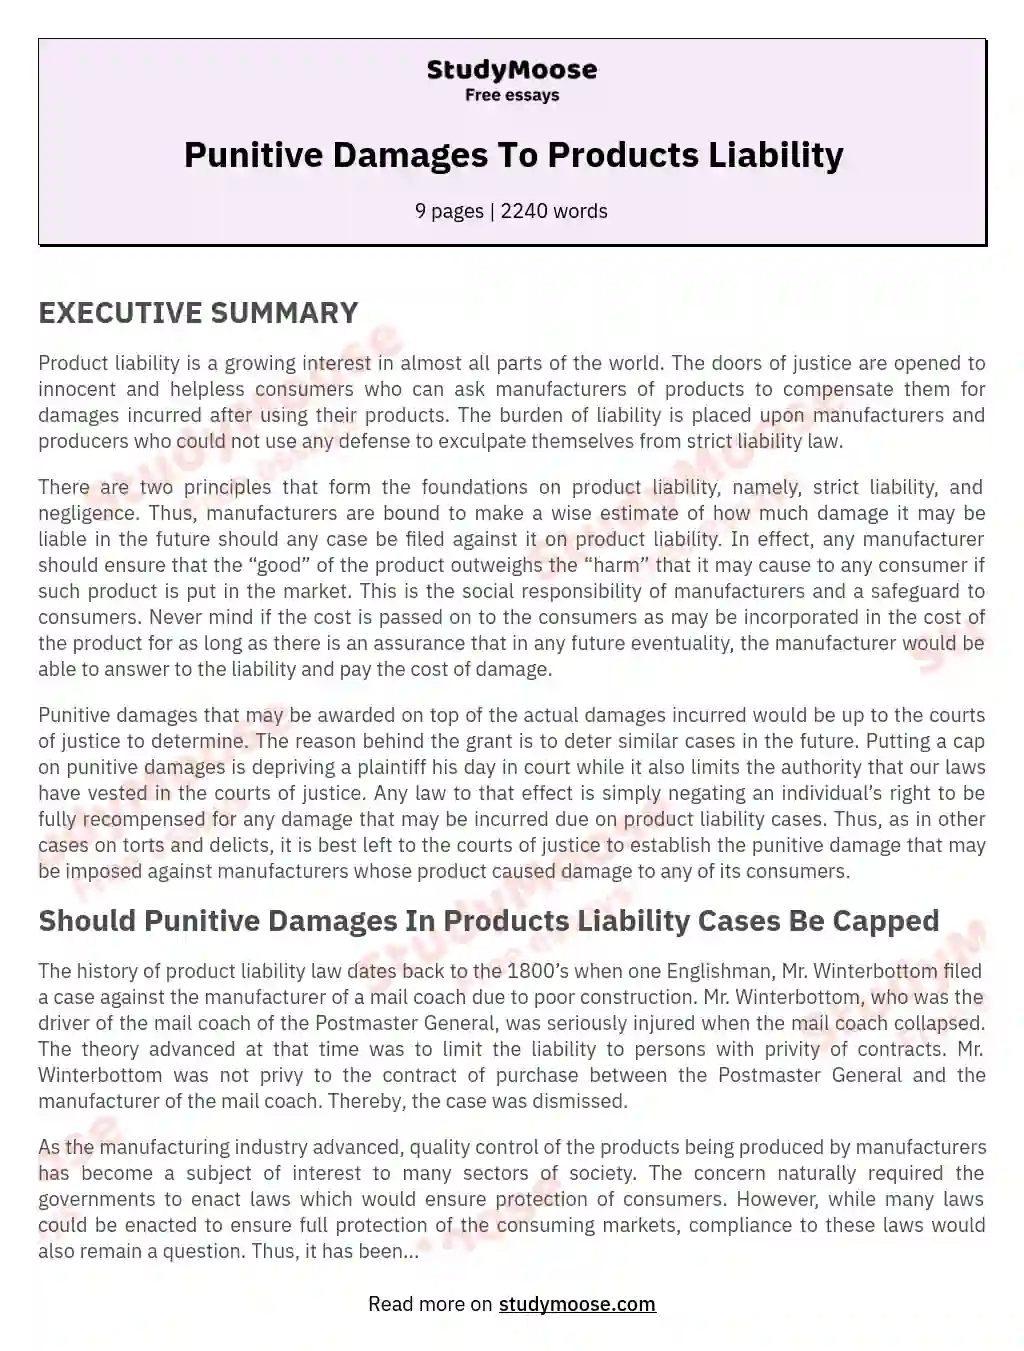 Punitive Damages To Products Liability